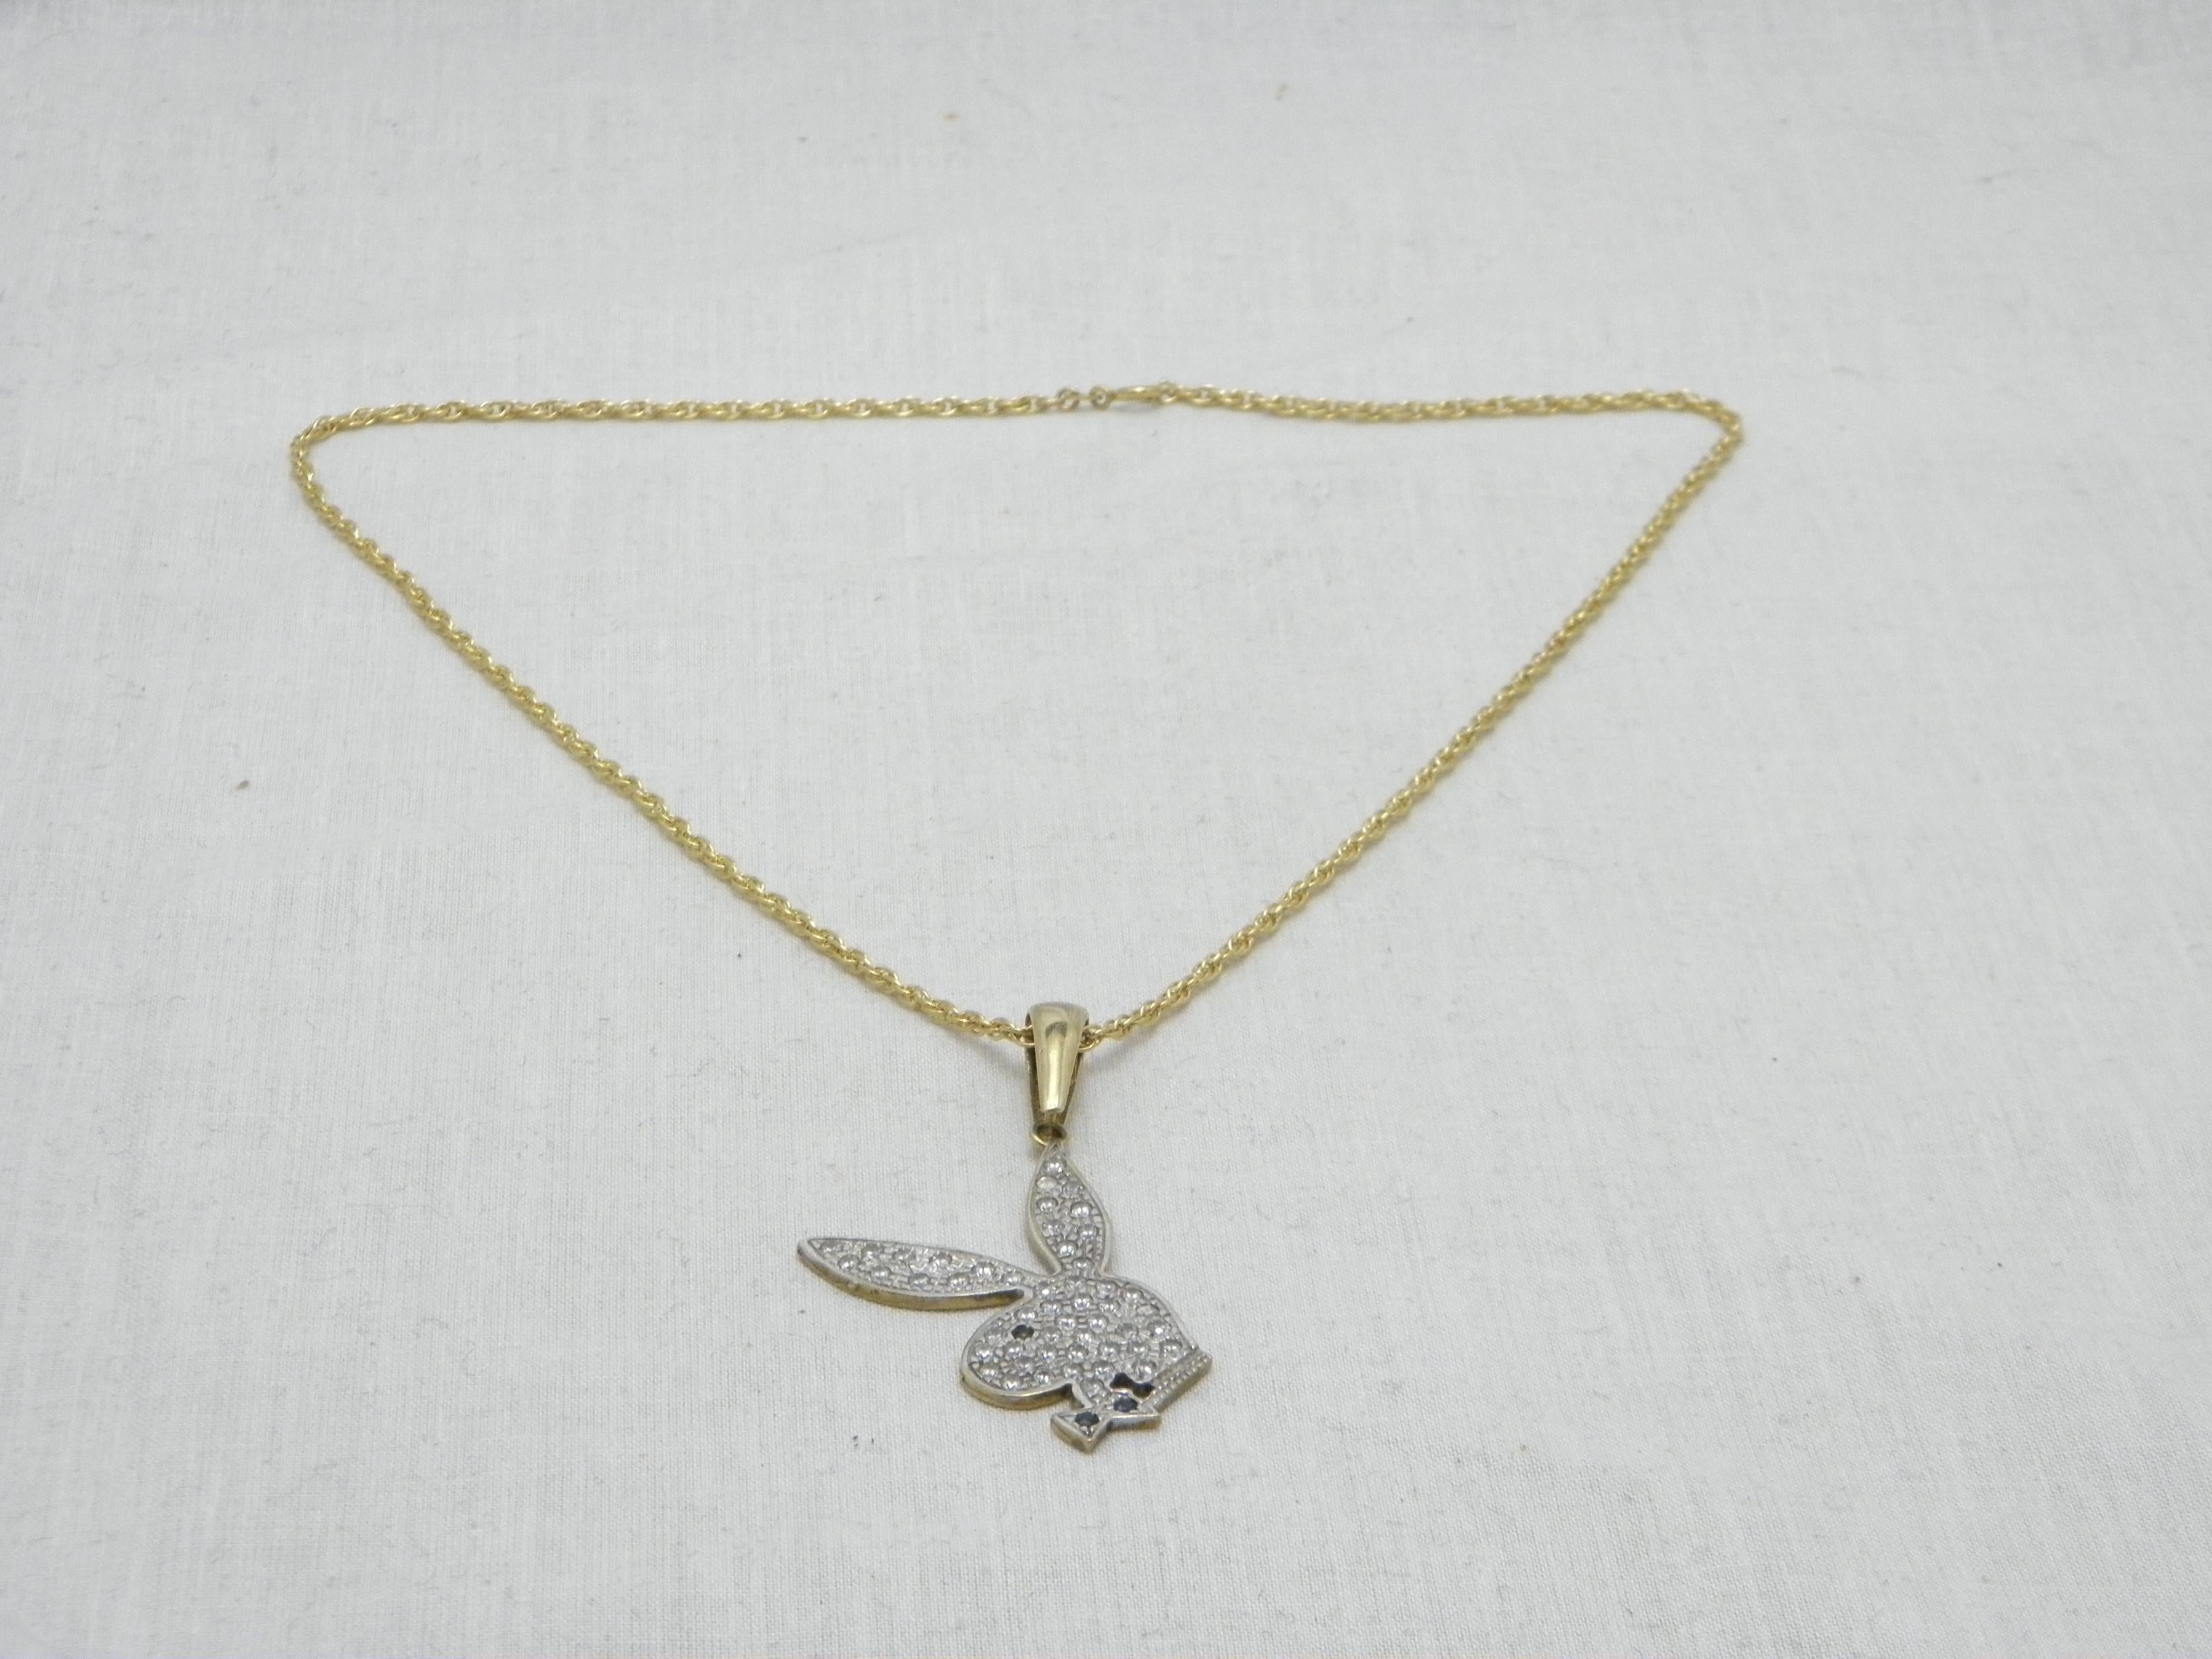 Women's or Men's Vintage 9ct Gold Enormous Playboy Bunny Pendant Necklace Rope Chain 375 20 Inch For Sale